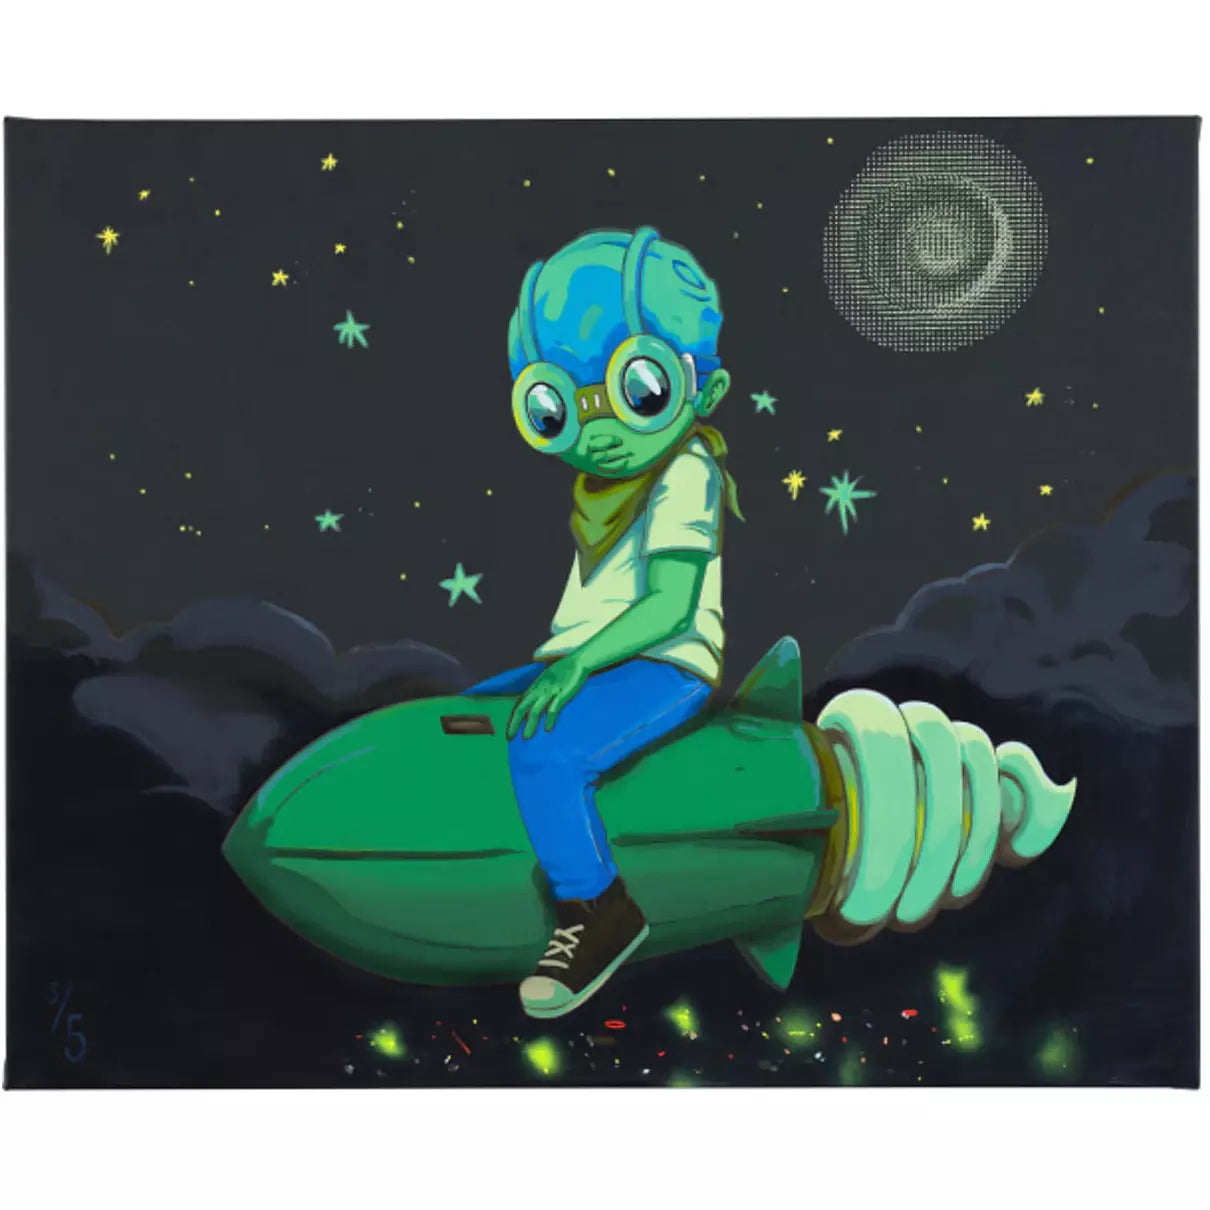 Hebru Brantley Night Flight, 2021 Digital print with screen printed glow in the dark ink on 330gsm Museum Cotton Smooth Rag 36 × 29 in Edition of 175  Hand Signed, Dated + Numbered by the artist. Accompanied by original proof of purchase. 